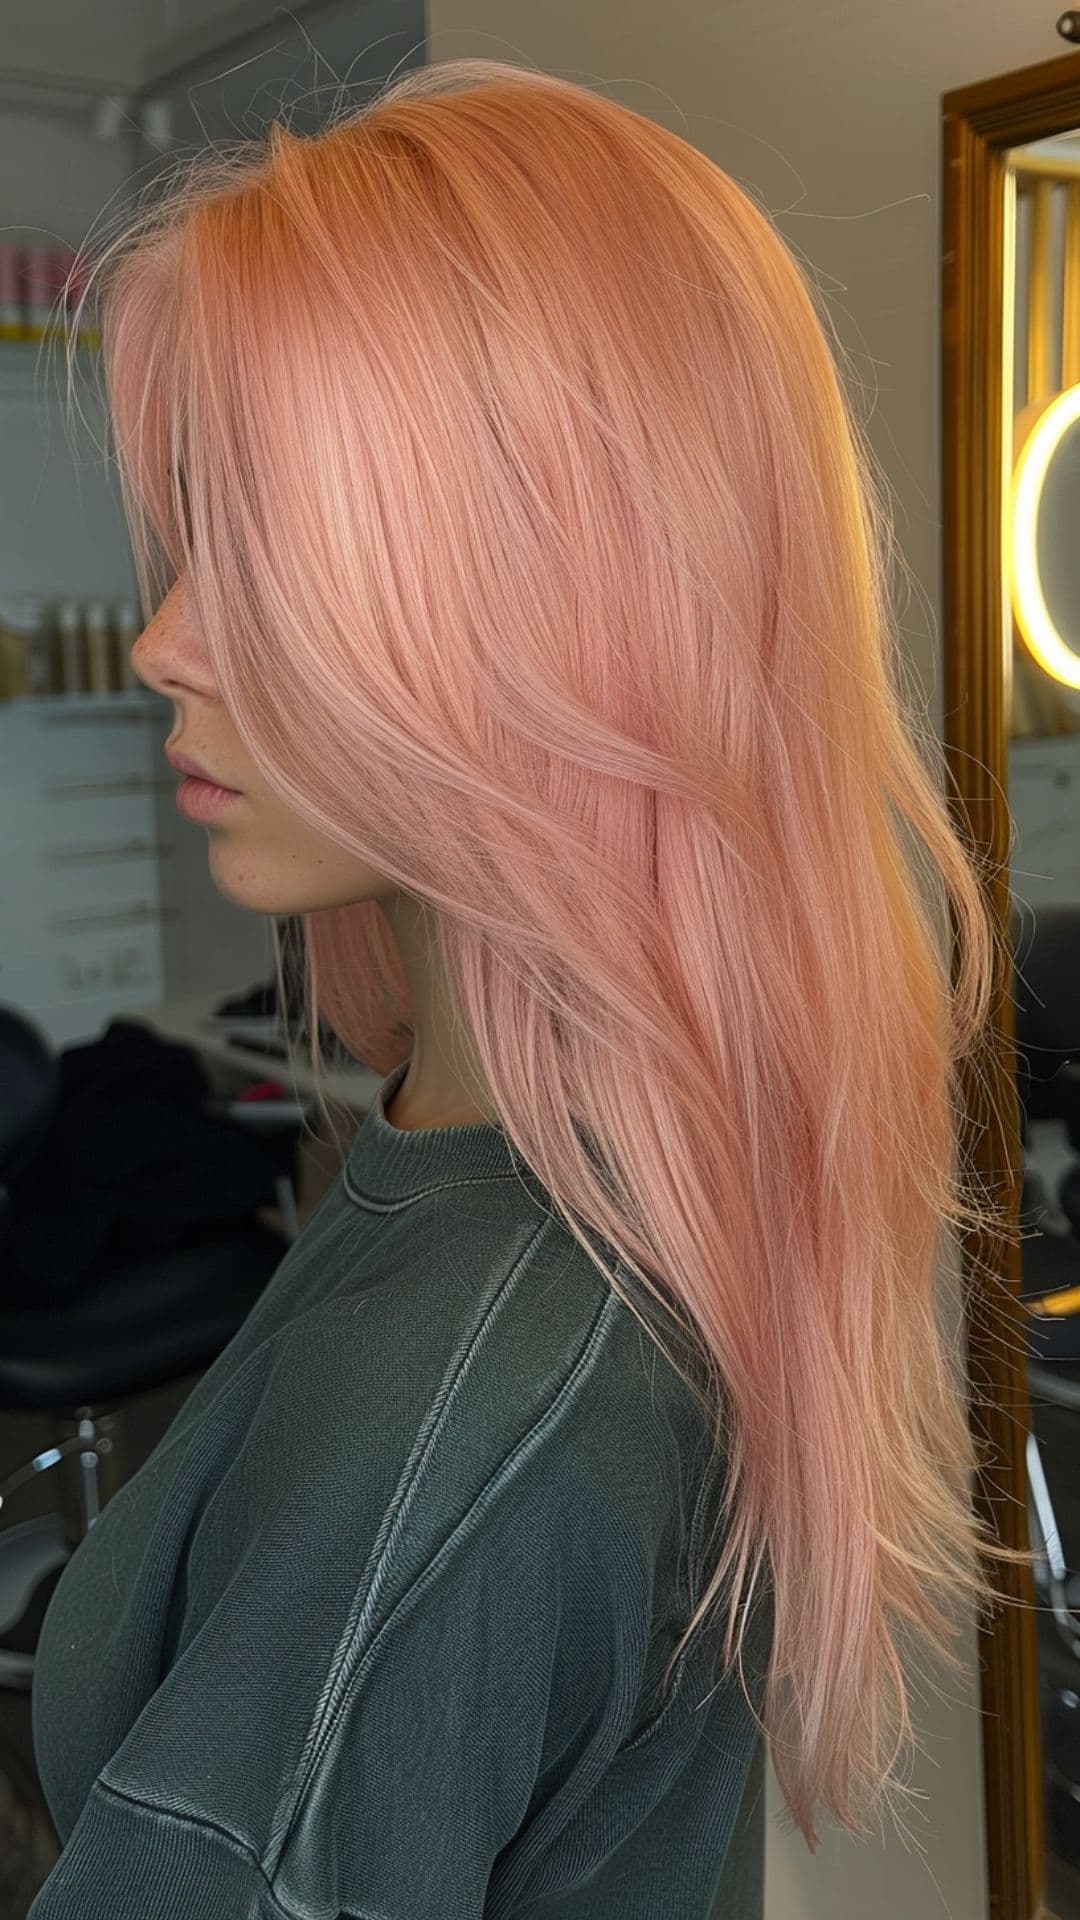 A young woman modelling a pastel pink hair.